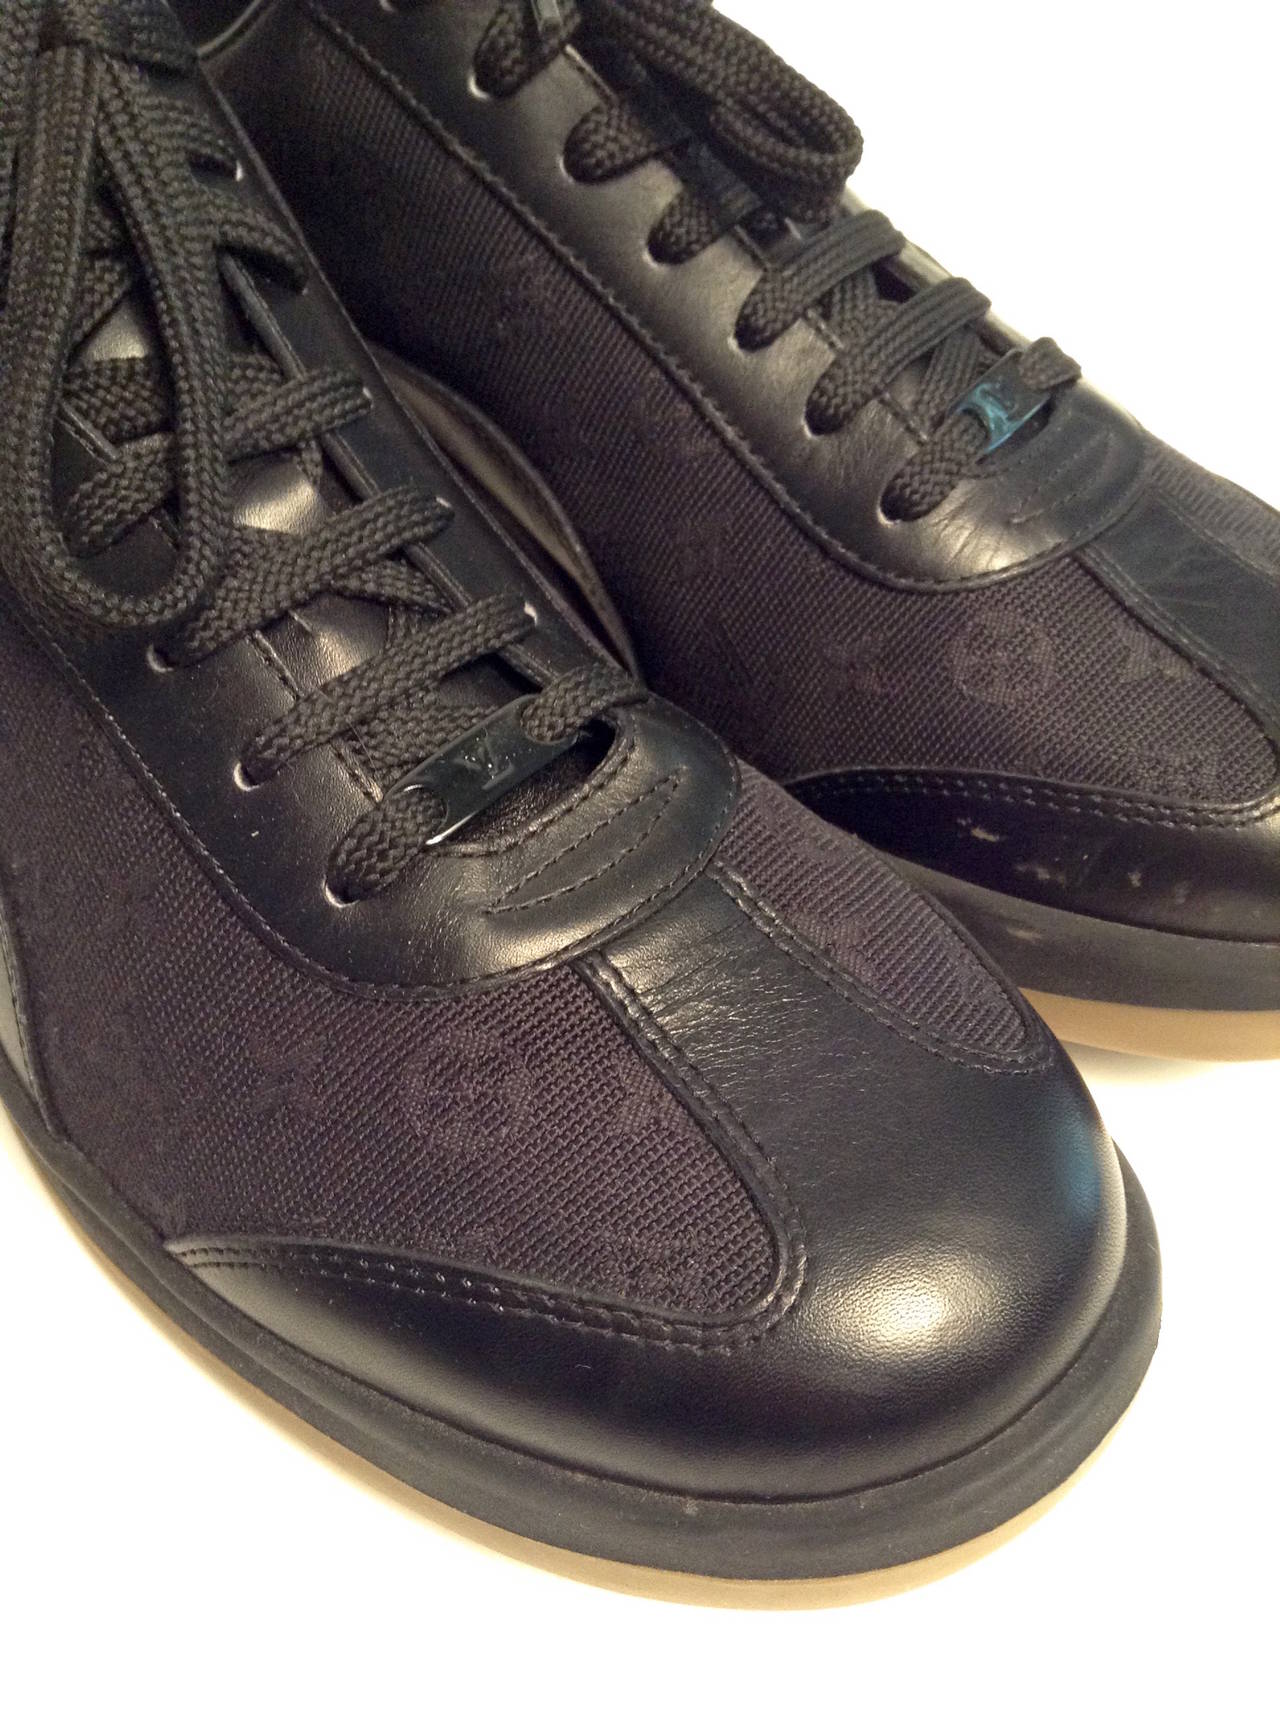 The perfect pair of kicks. Black on black monogram with black leather trim. 

In very good condition.

1.5